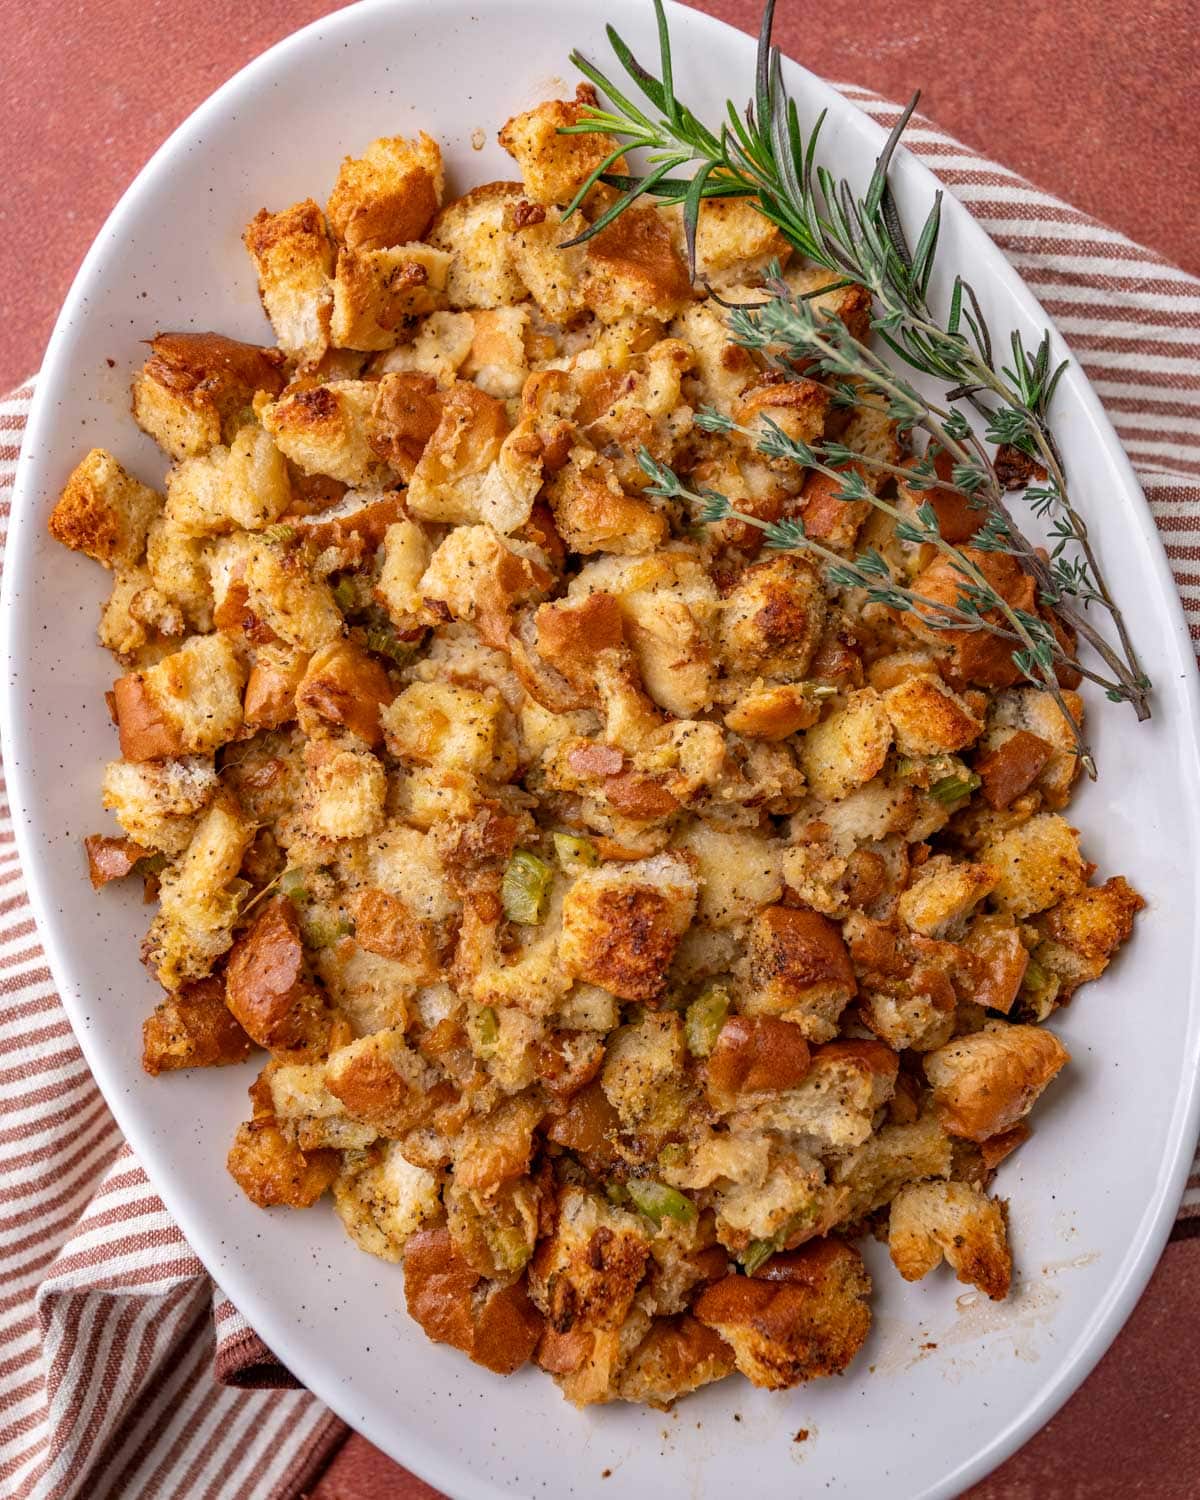 How Much Stuffing?